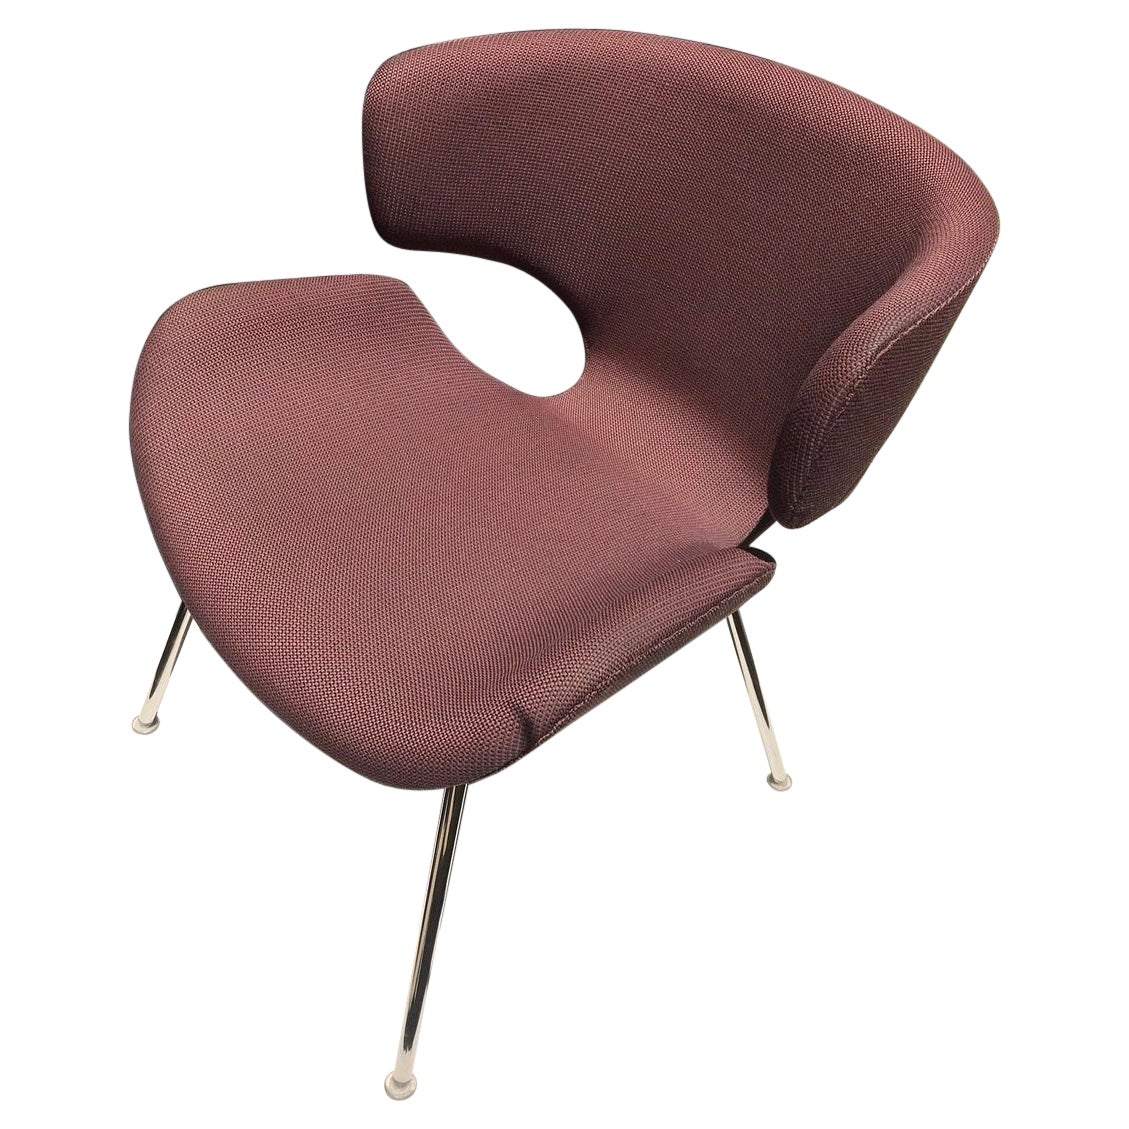 Japanese Mid-Century Design "Kabuto" Lounge Chair For Sale